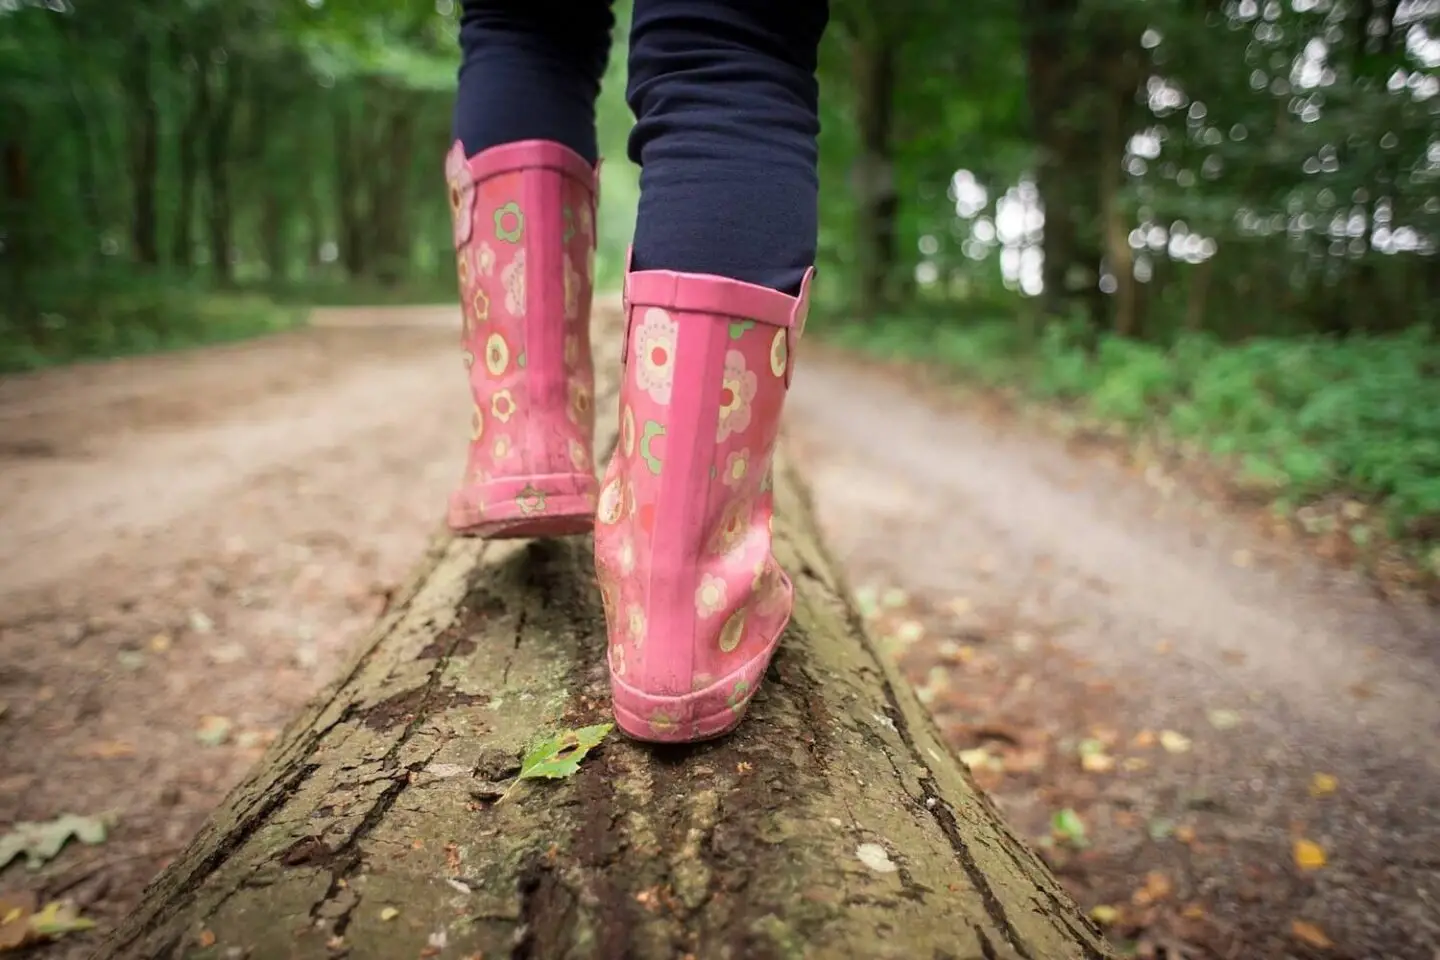 The legs of a child wearing pink welly boots. They are walking on a log in the forrest